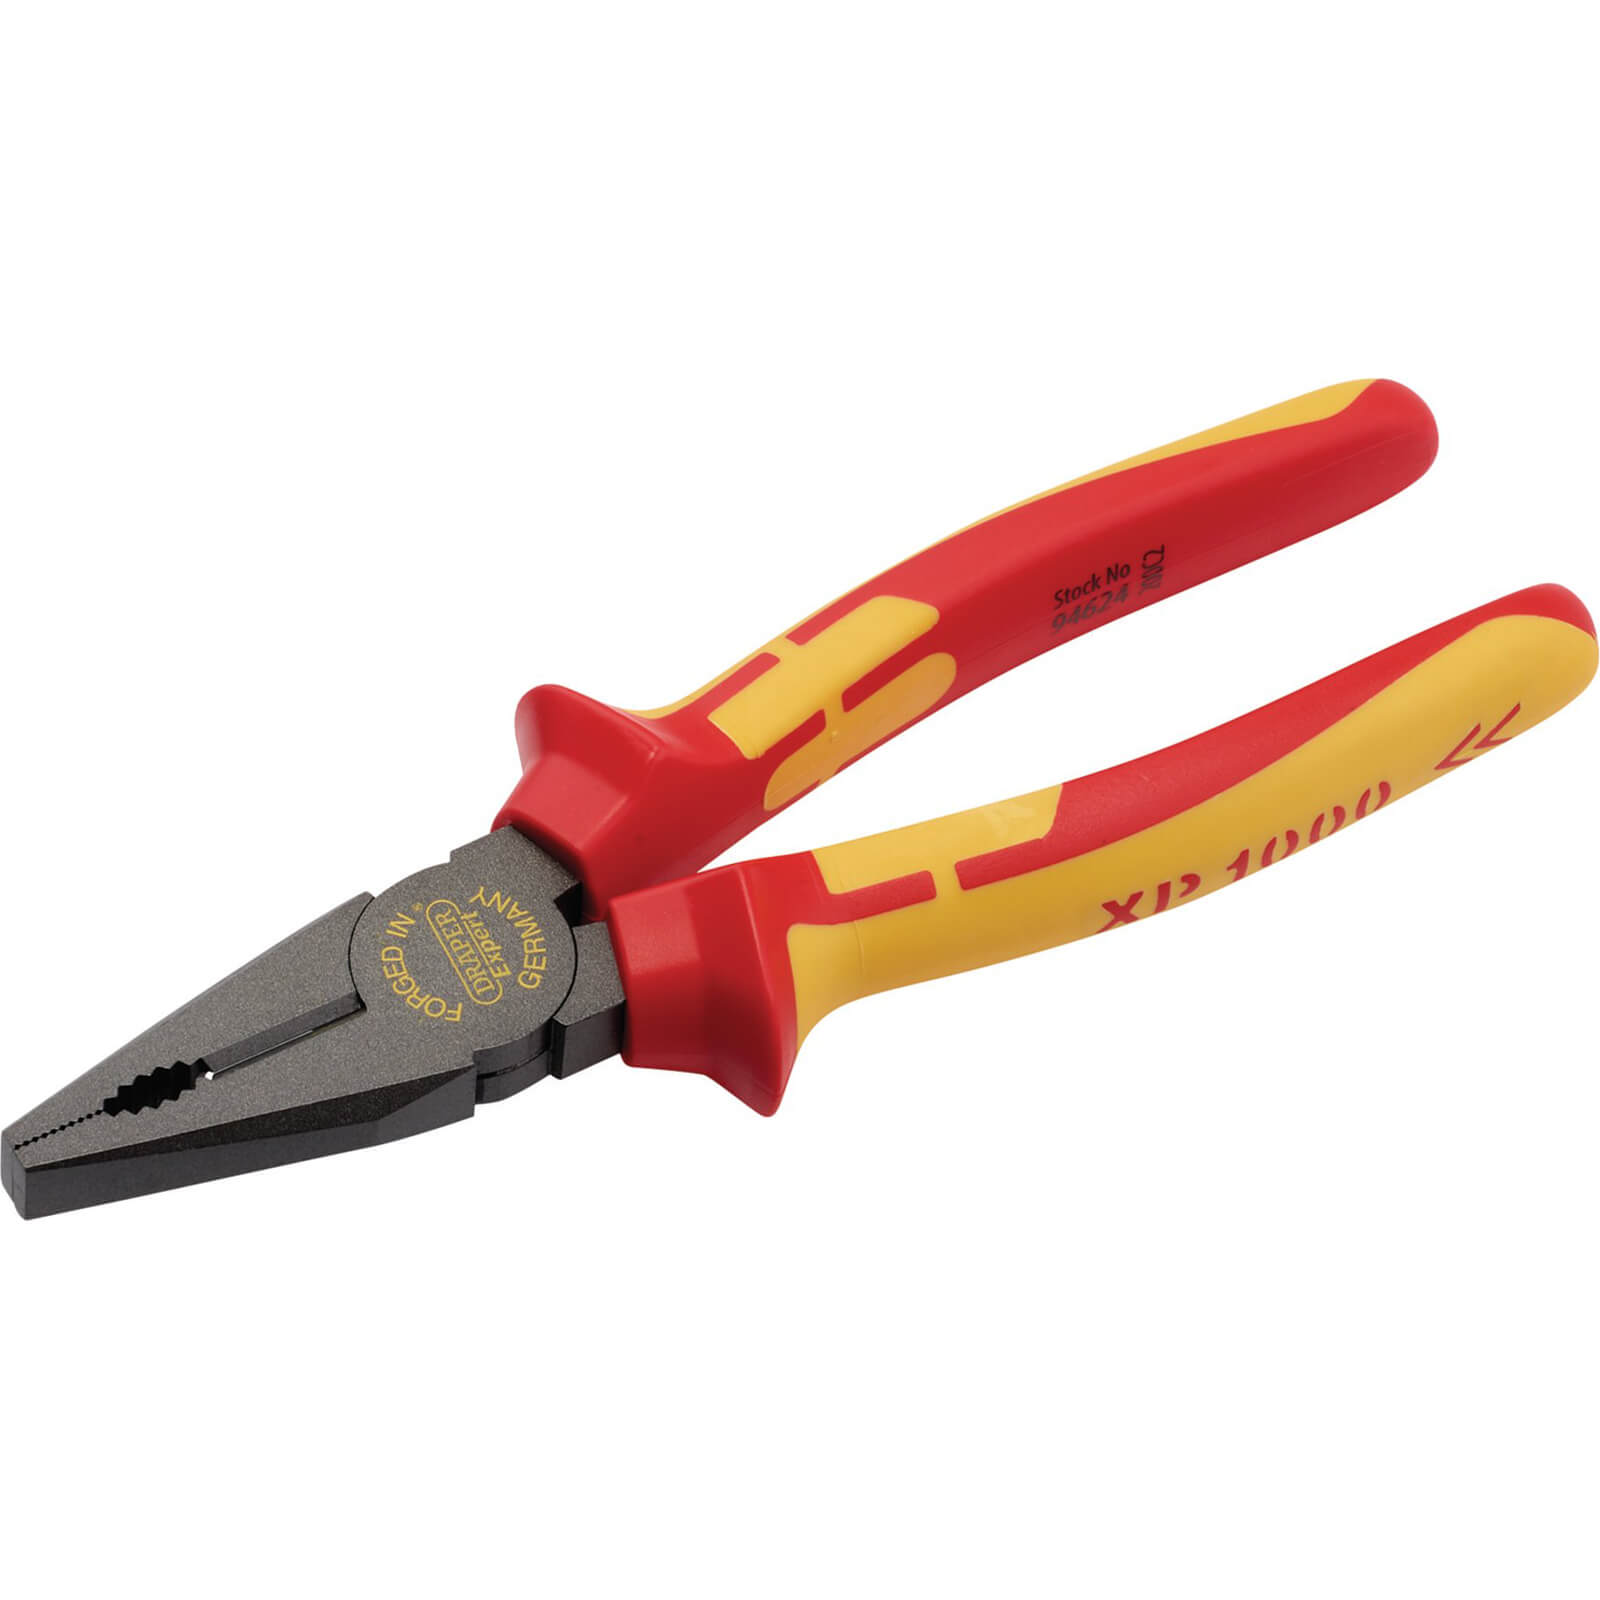 Photo of Draper Xp1000 Vde Insulated Combination Pliers 200mm